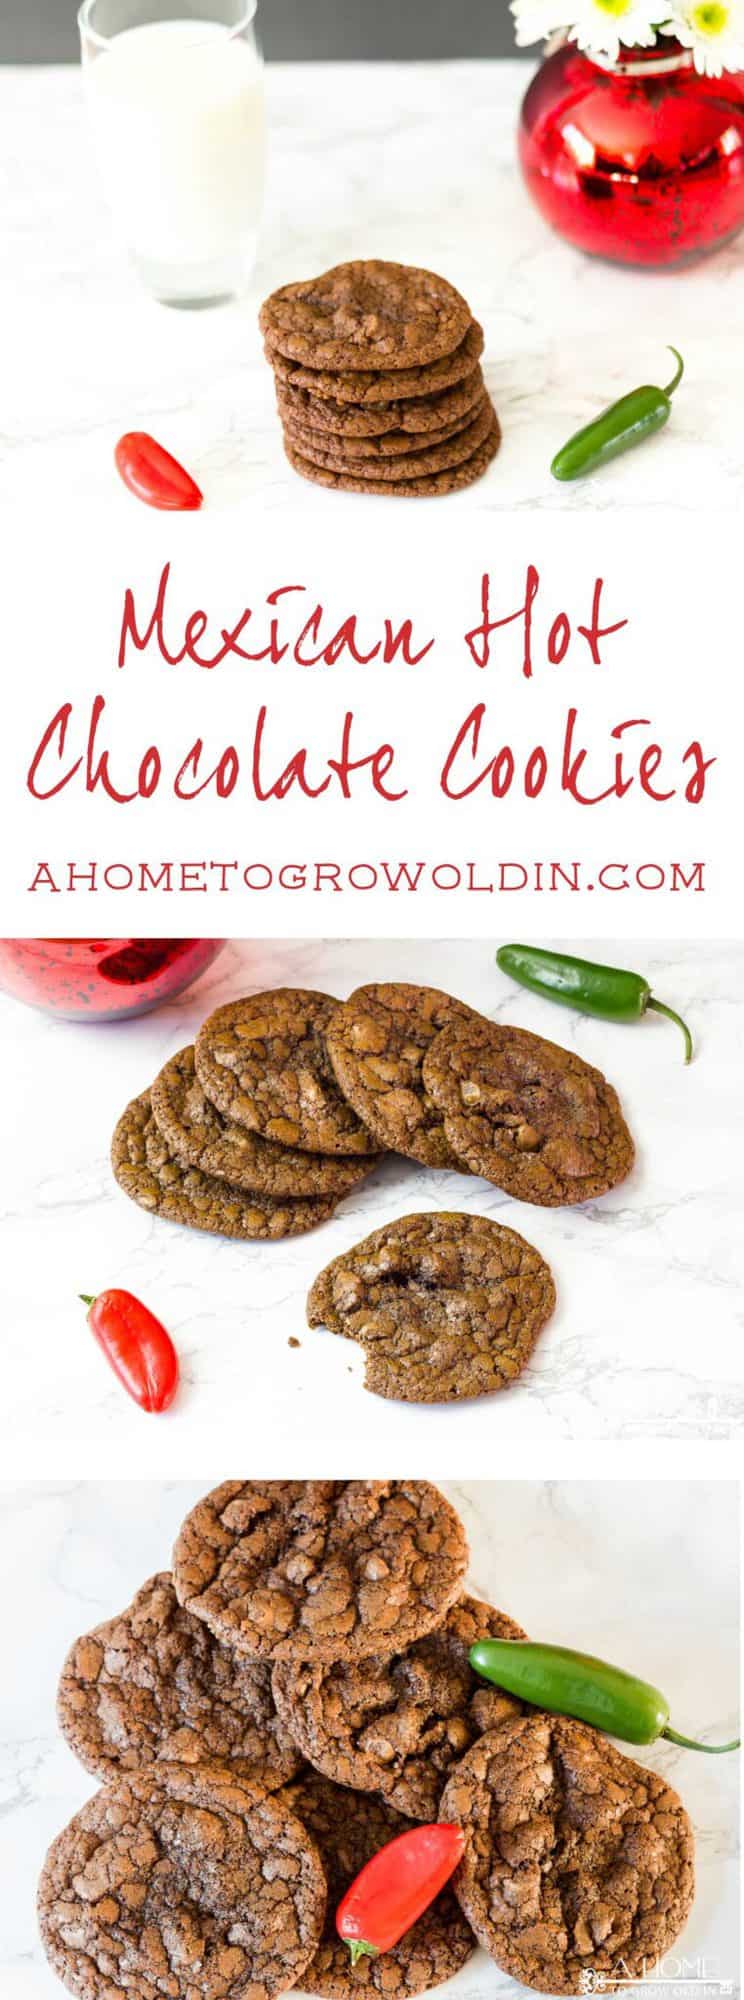 This spicy Mexican hot chocolate cookie recipe is amazing! If you love chocolate and cinnamon, this will be your "go to" cookie recipe. It tastes just like a Starbucks Chile Mocha!